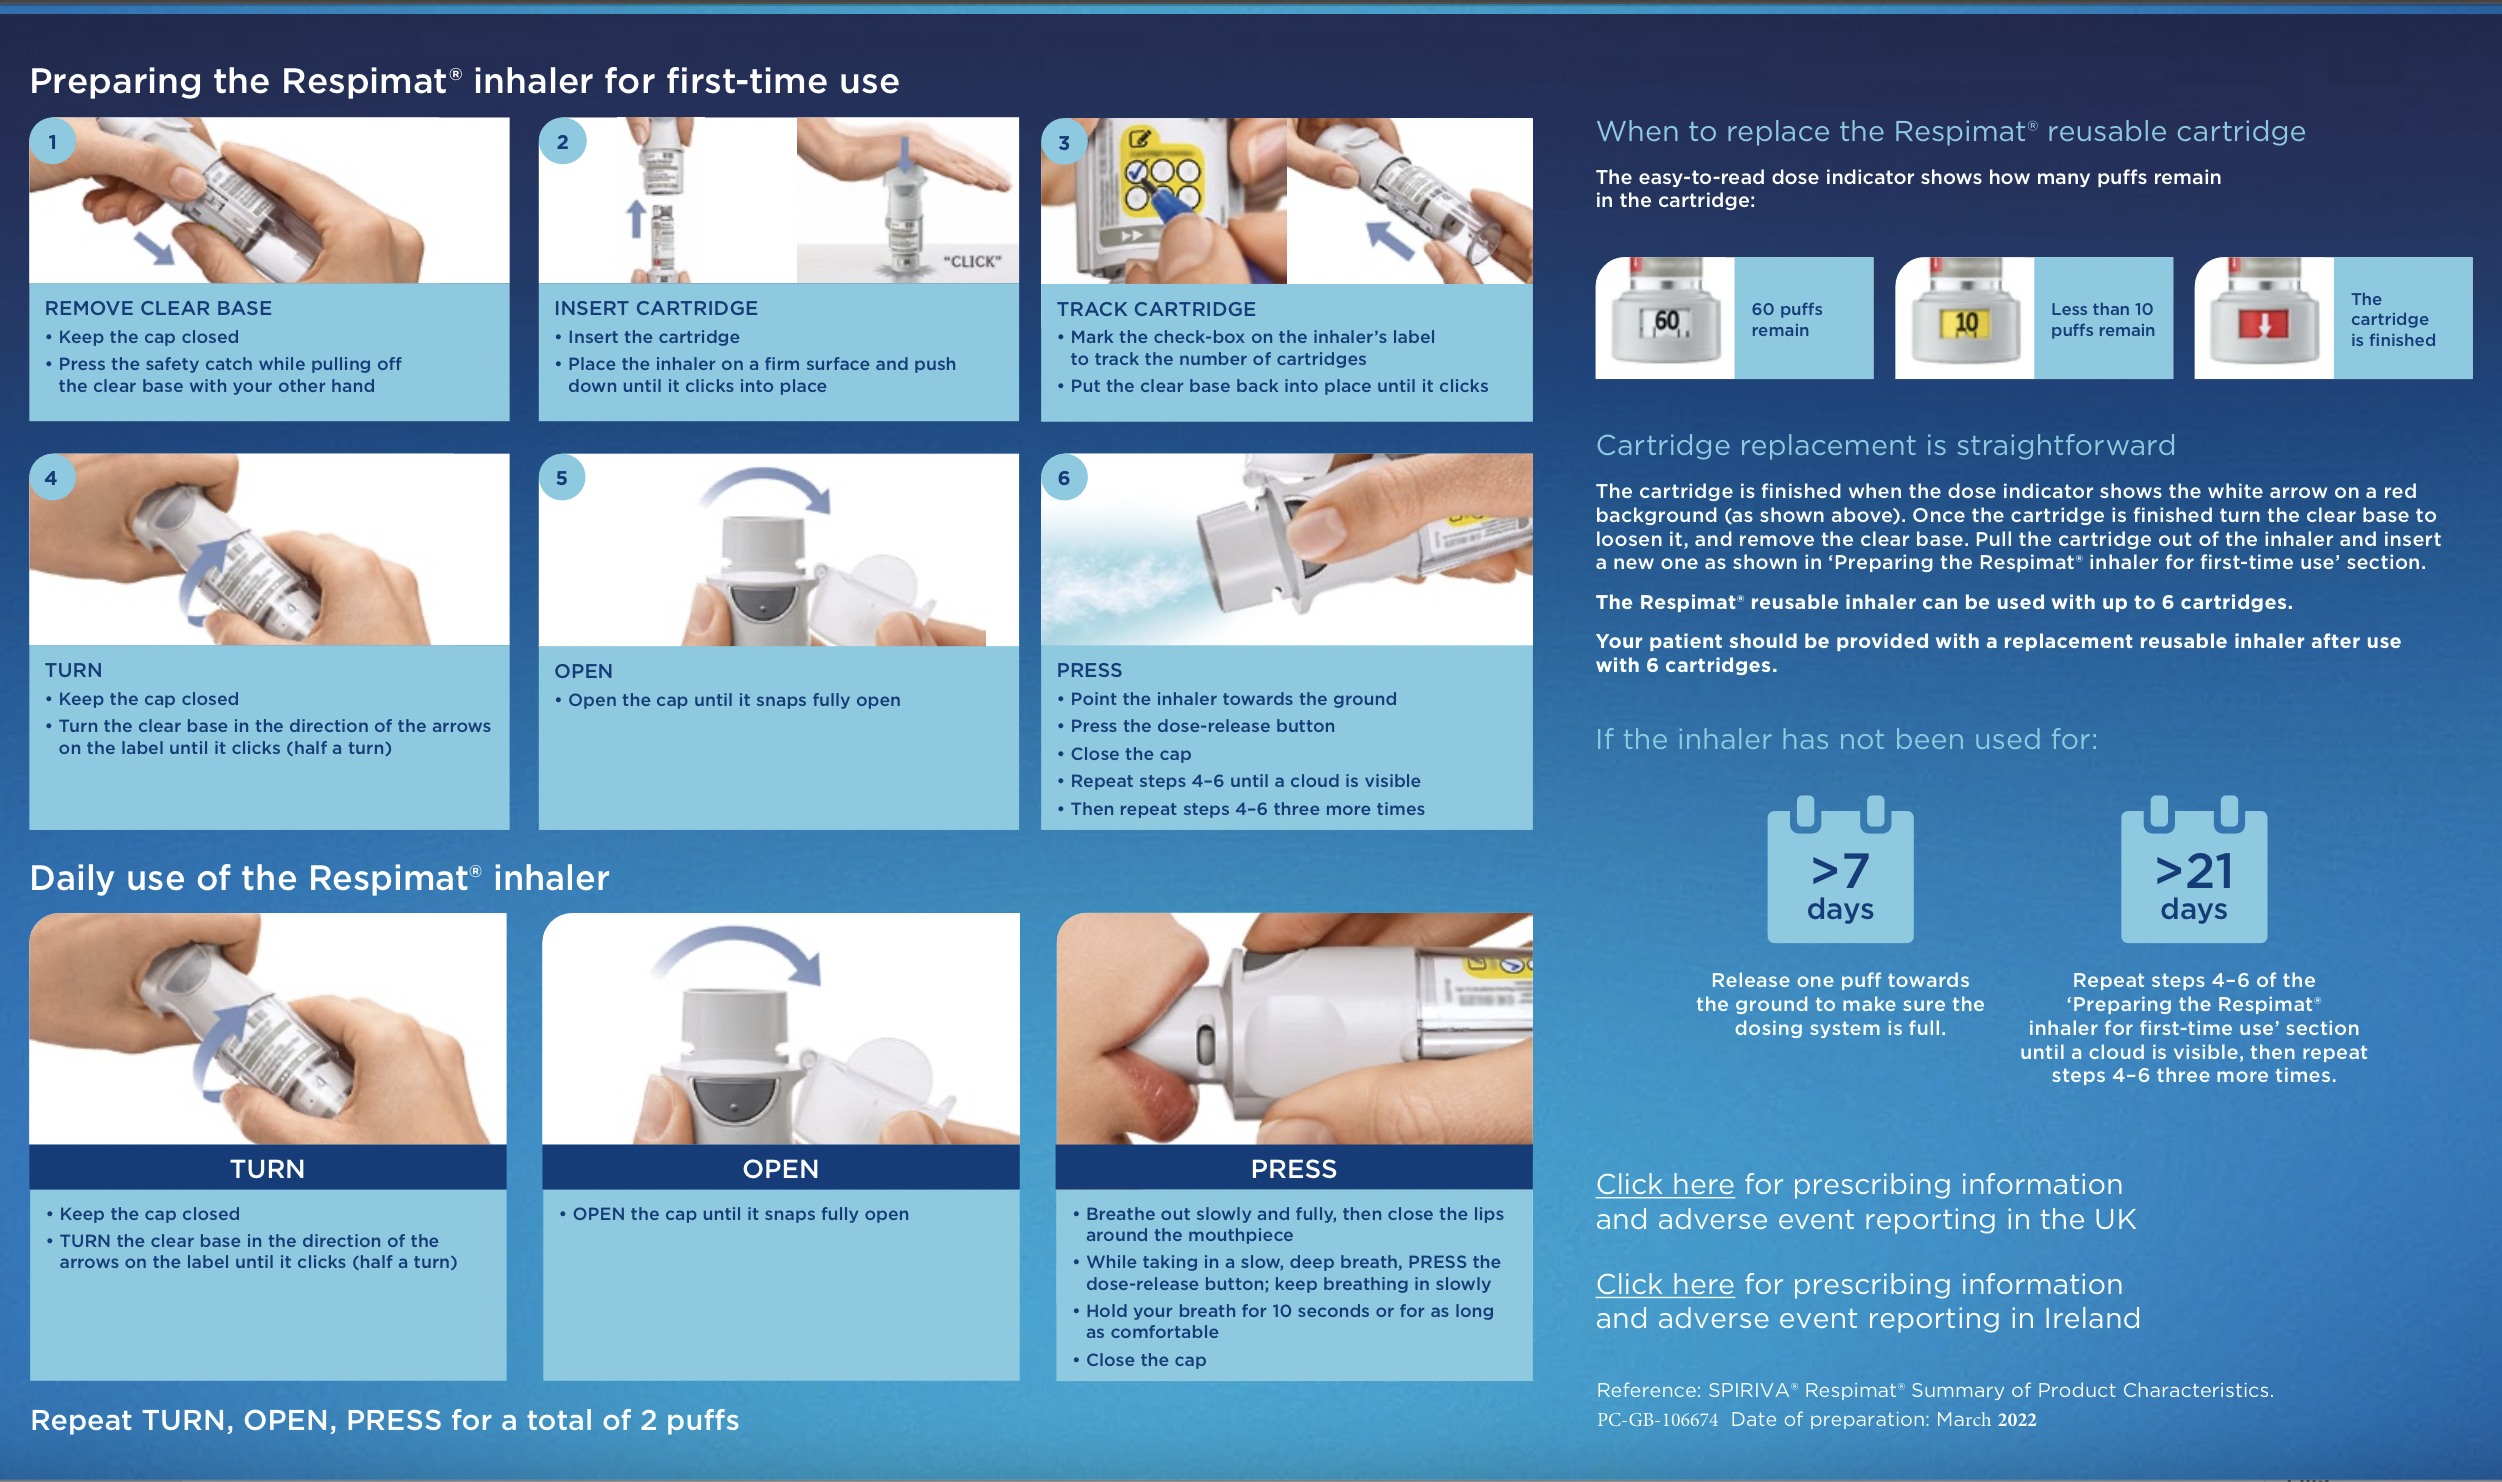 Infographic indicating steps to prepare the Respimat inhaler for first-time use, daily use & when to replace the reusable cartridge